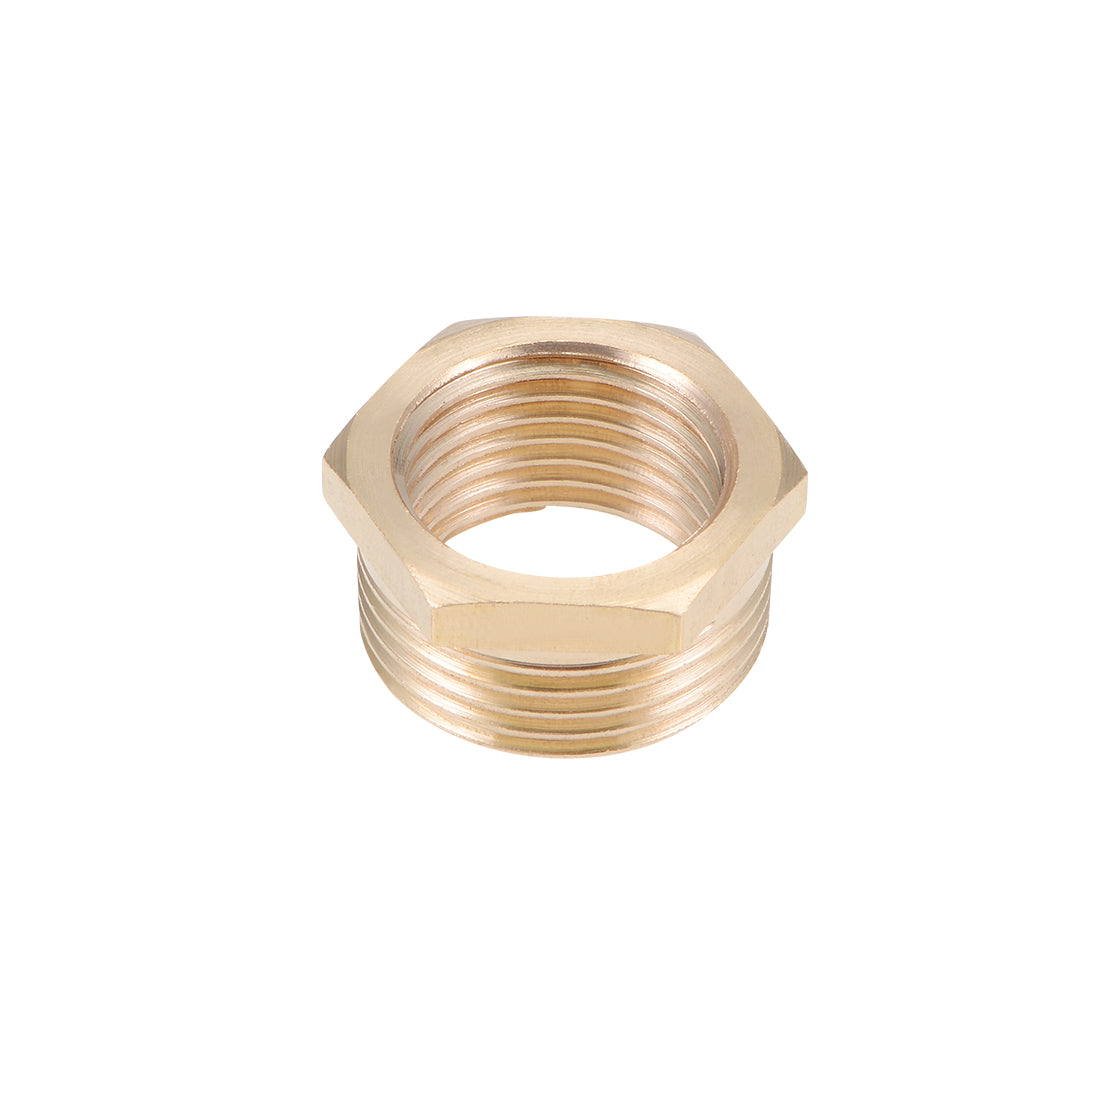 uxcell Uxcell Brass Threaded Pipe Fitting G3/4 Male x G1/2 Female Hex Bushing Adapter 10pcs